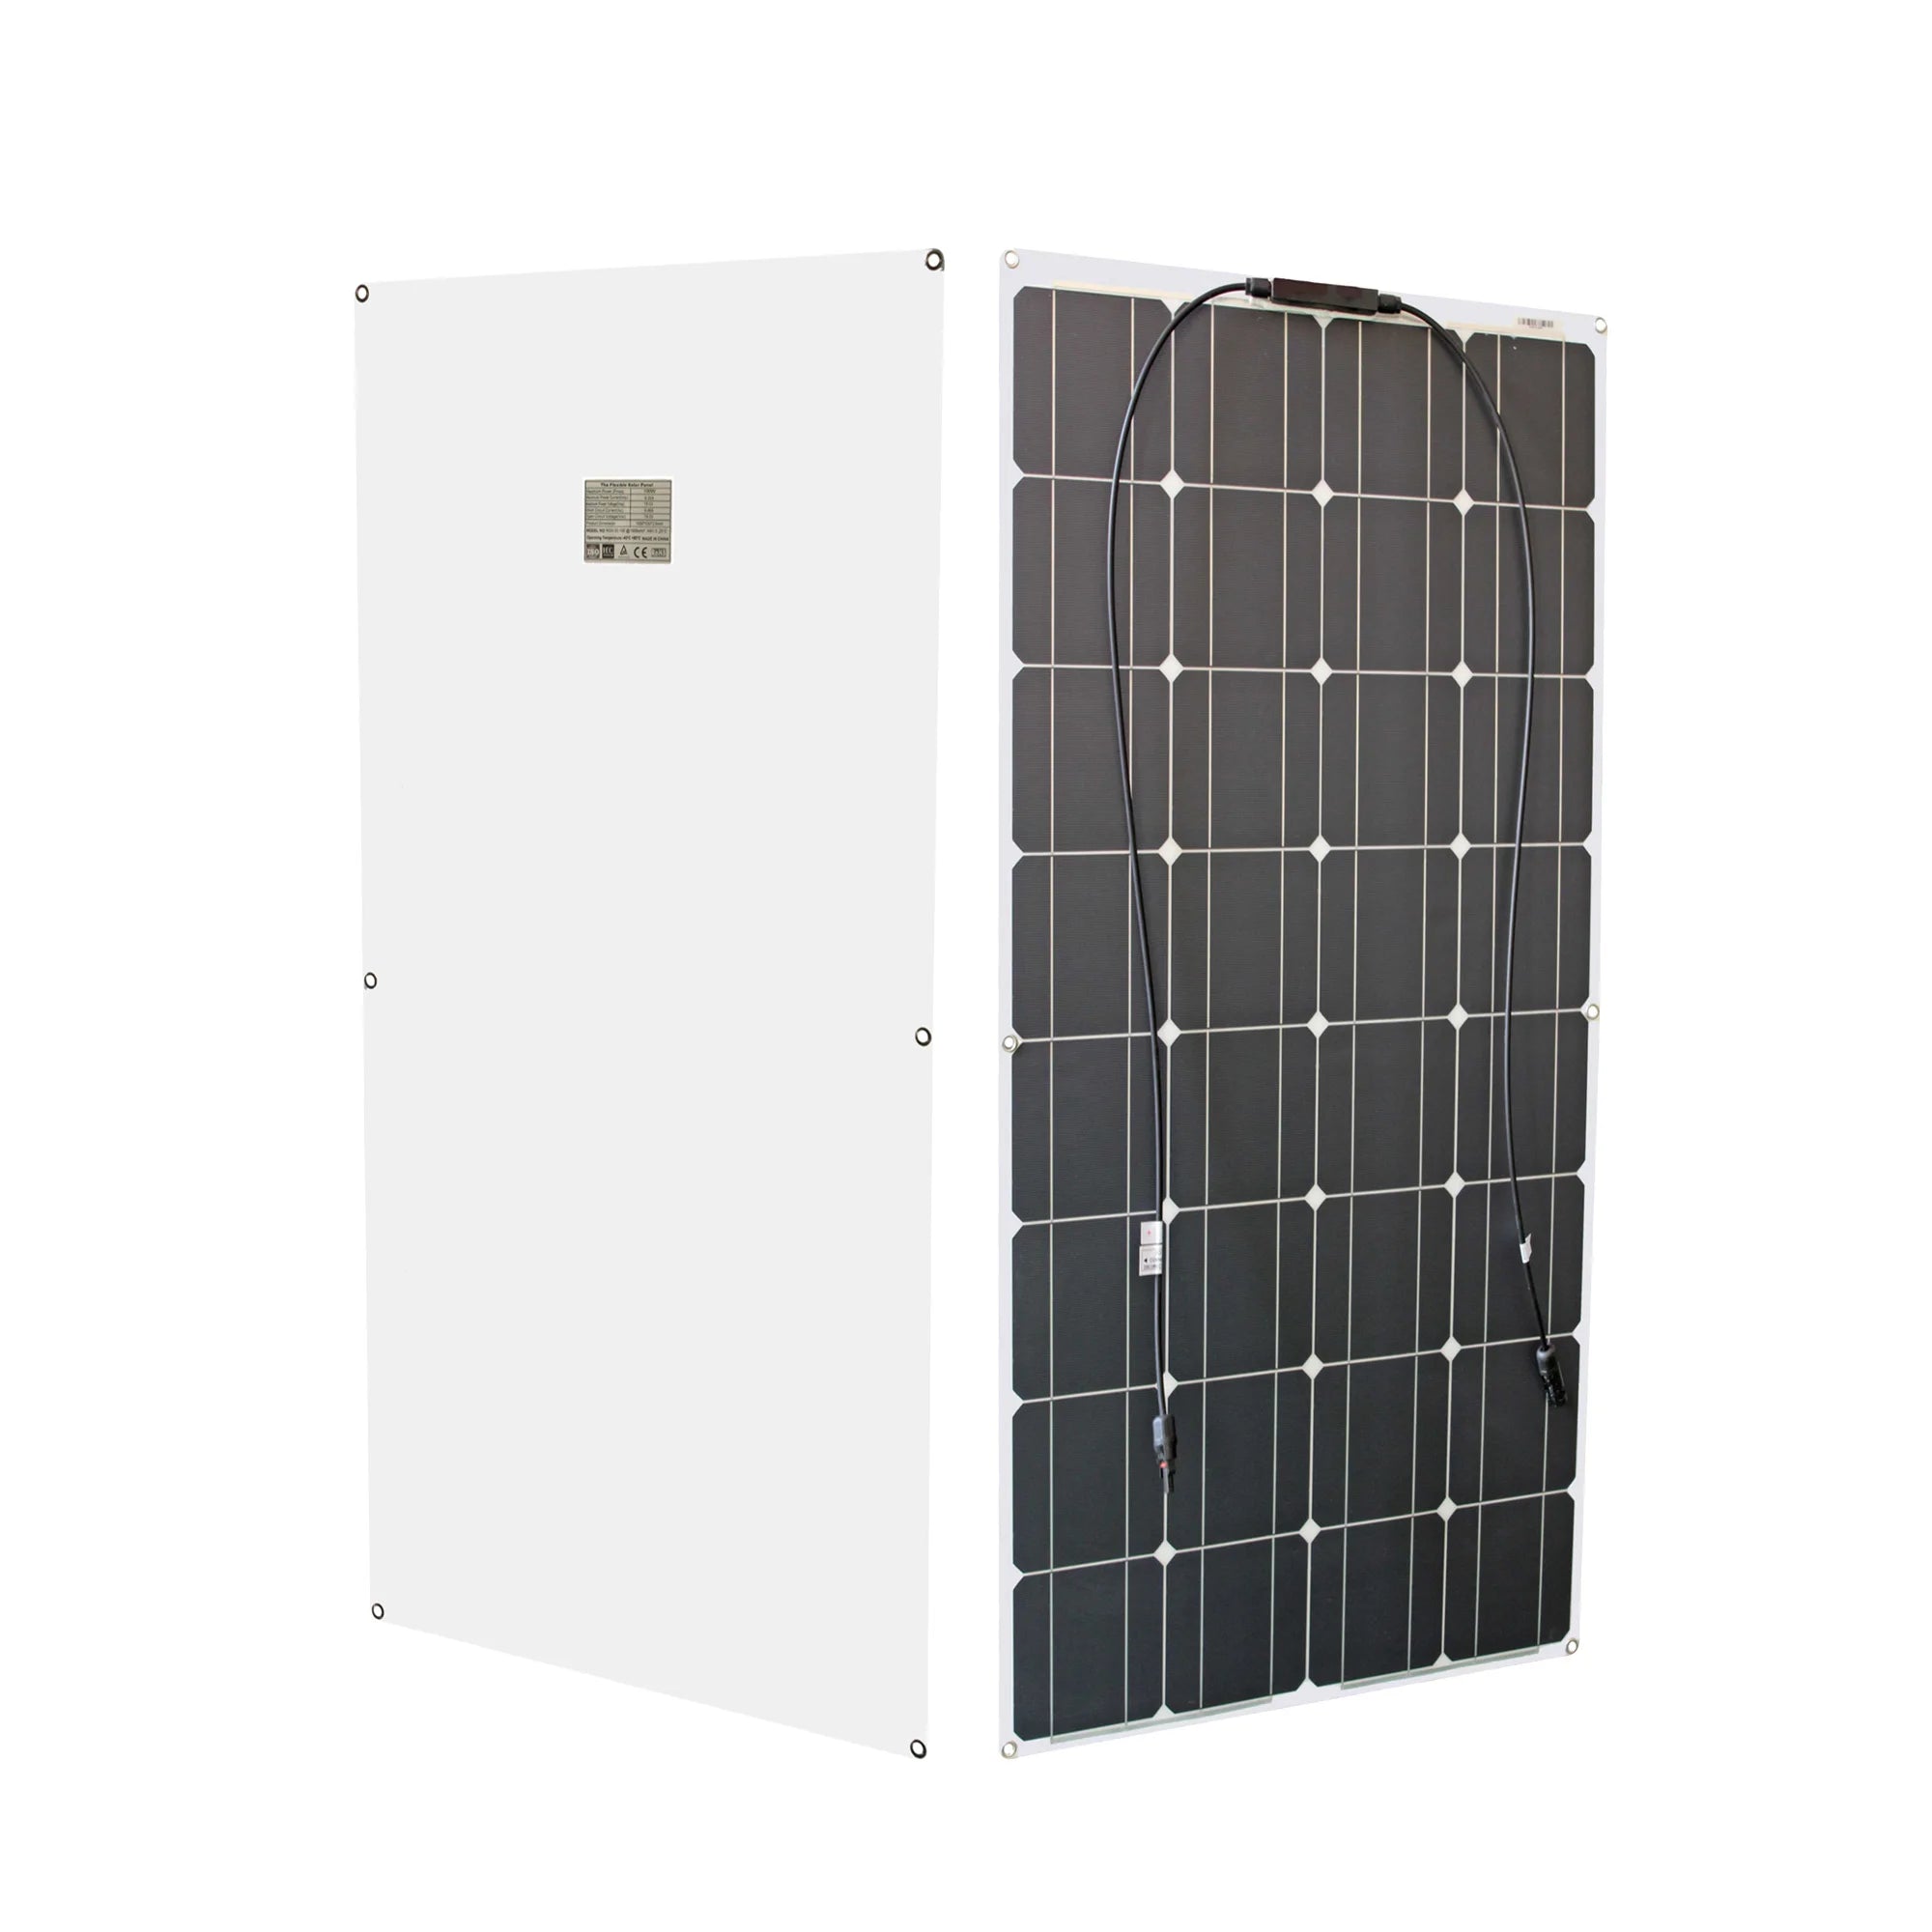 300w solar panel, Be aware of customs issues and potential return shipping costs when refusing a package.